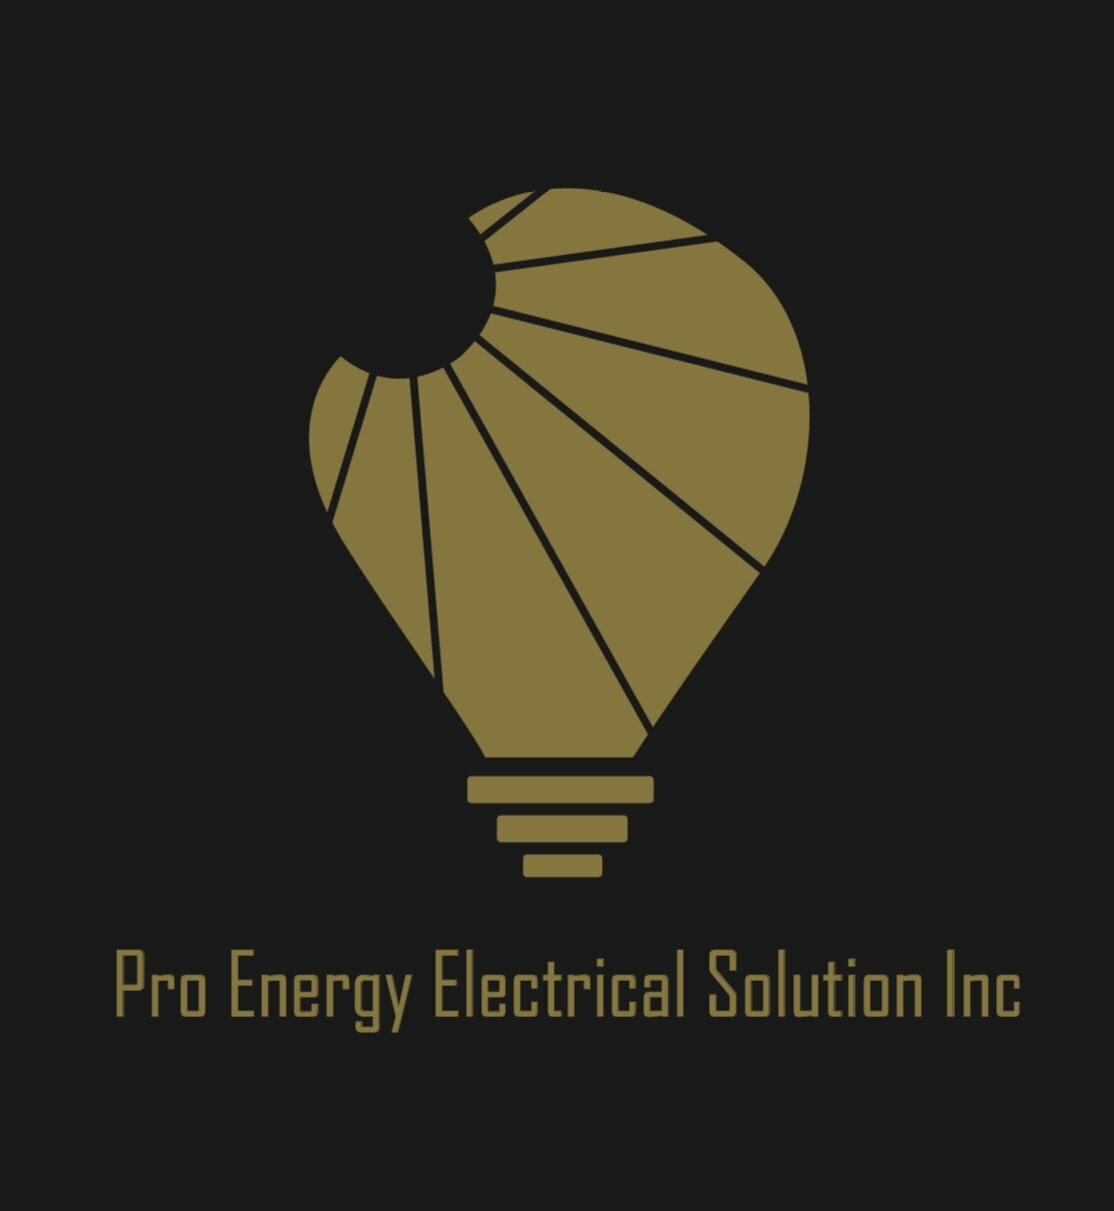 Pro Energy Electrical Solution Inc.'s logo